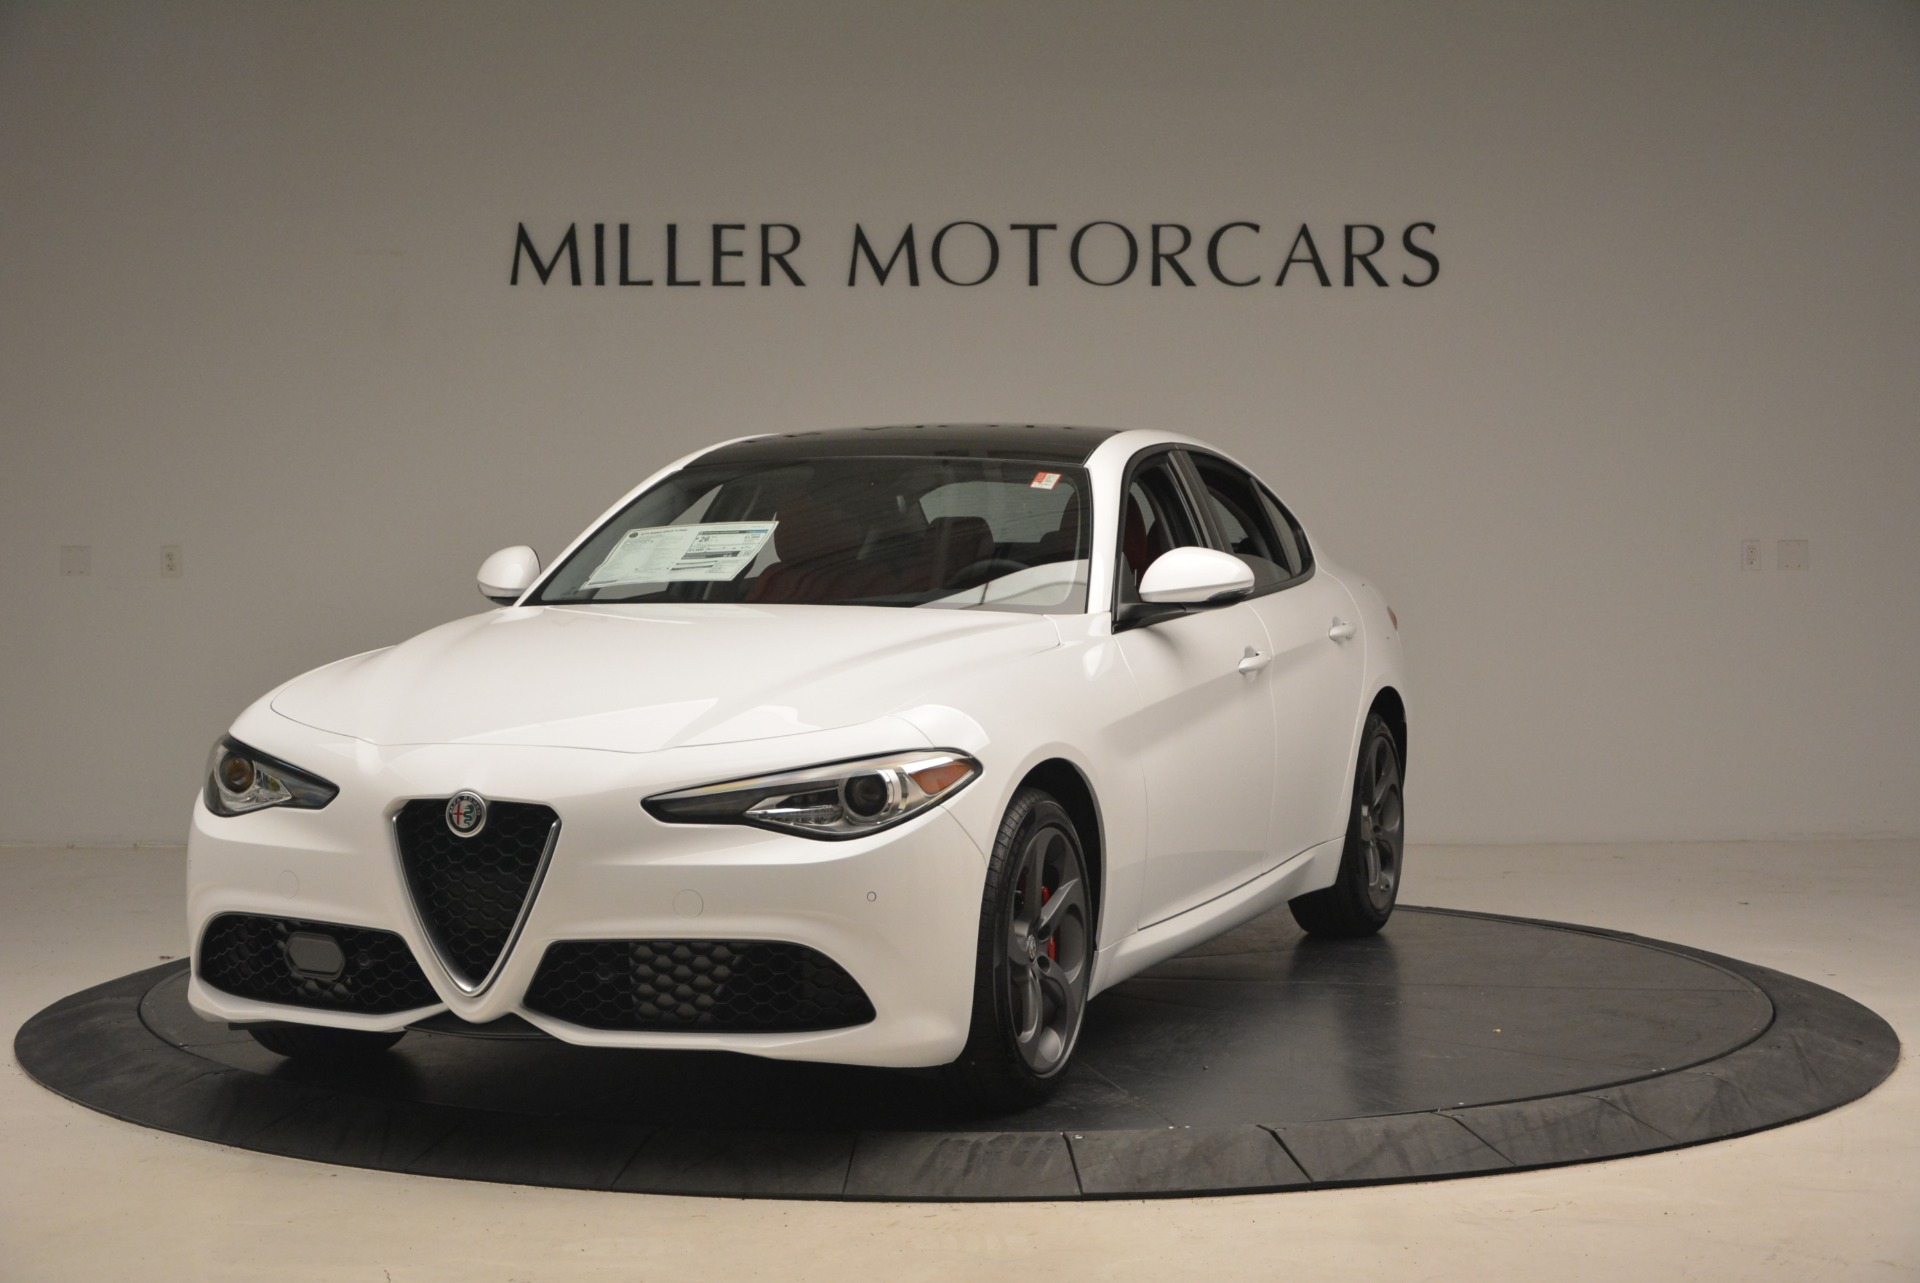 New 2018 Alfa Romeo Giulia Sport Q4 for sale Sold at Rolls-Royce Motor Cars Greenwich in Greenwich CT 06830 1